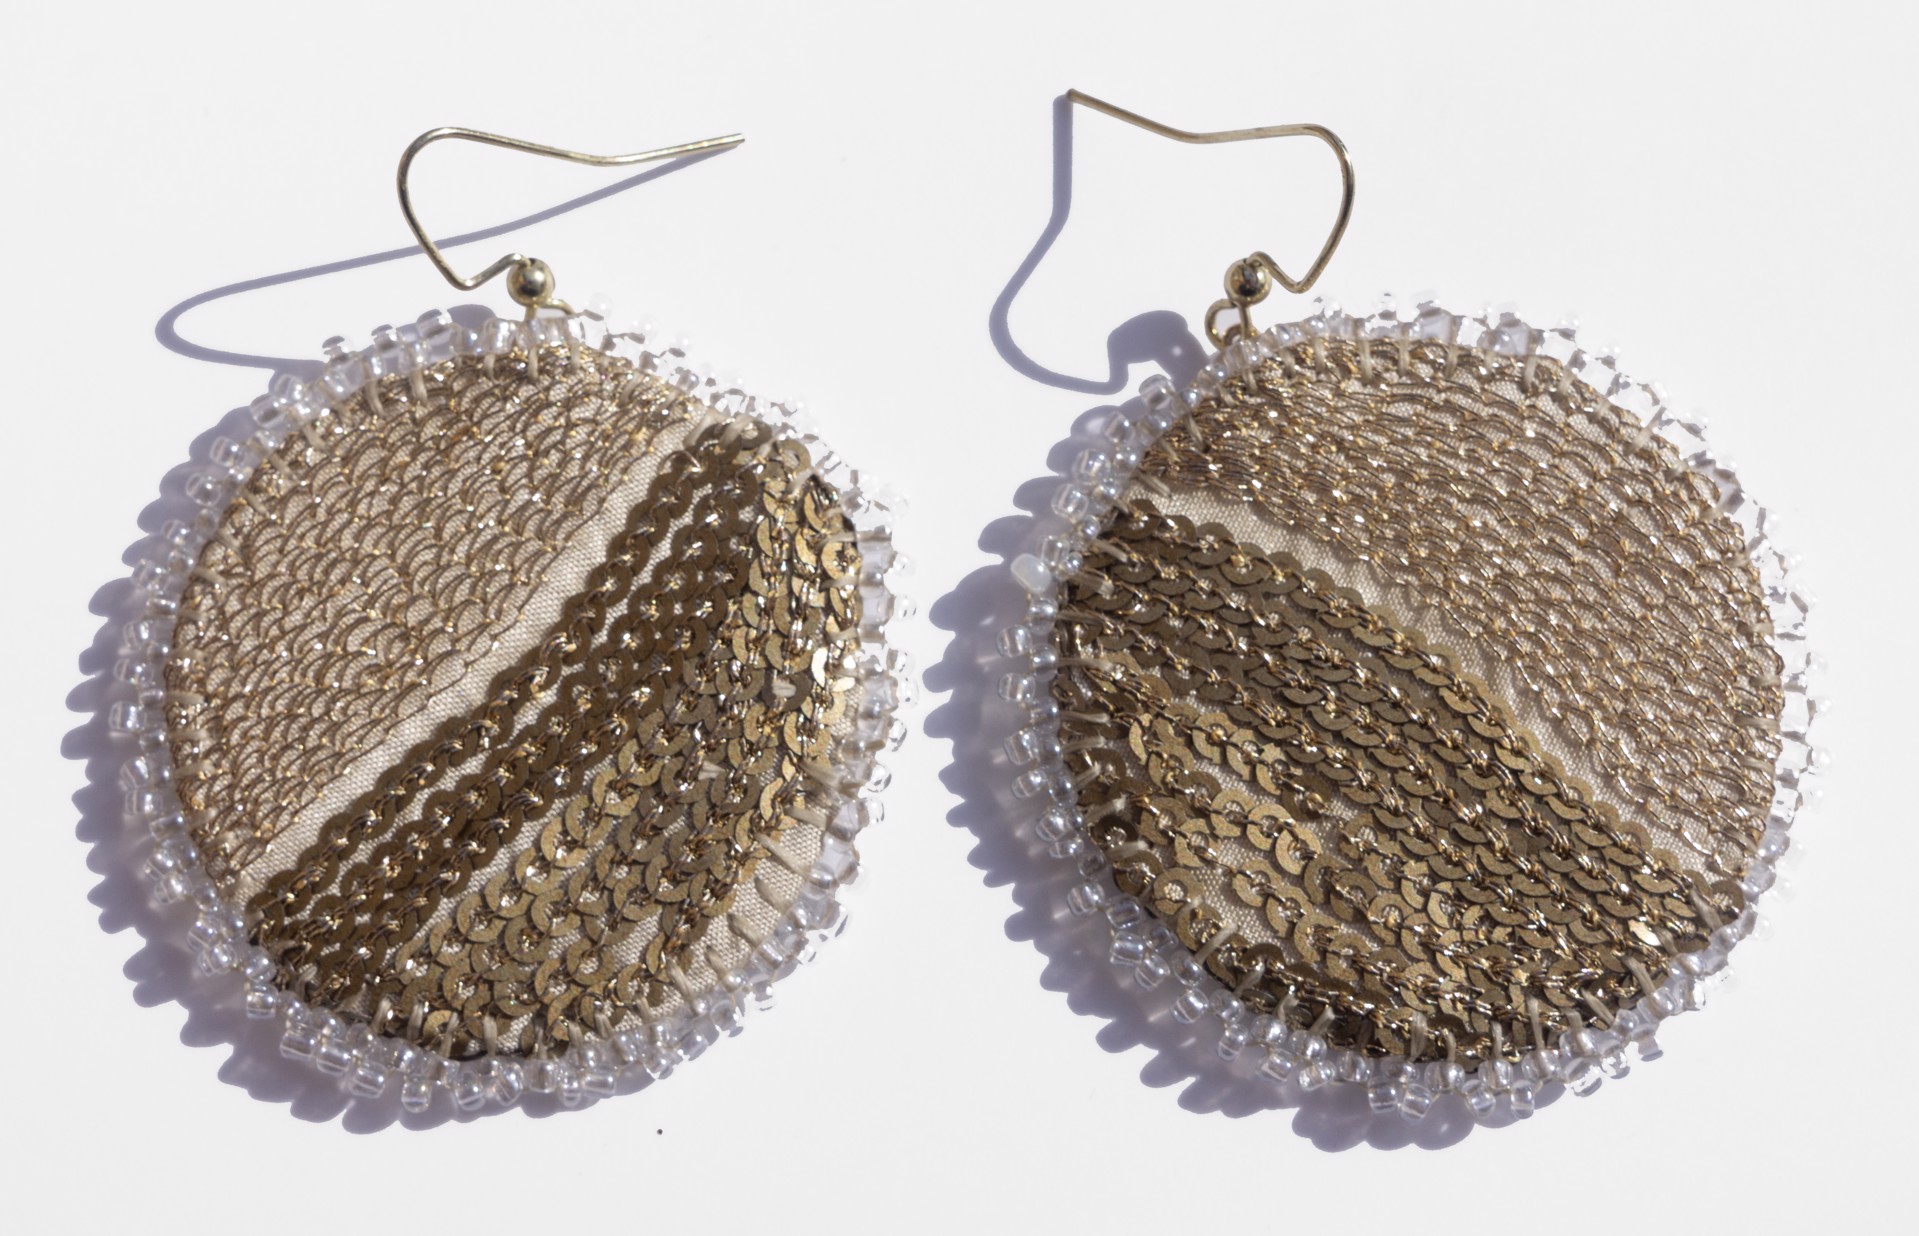 Sequin and embroidery earrings by Hattie Lee Mendoza